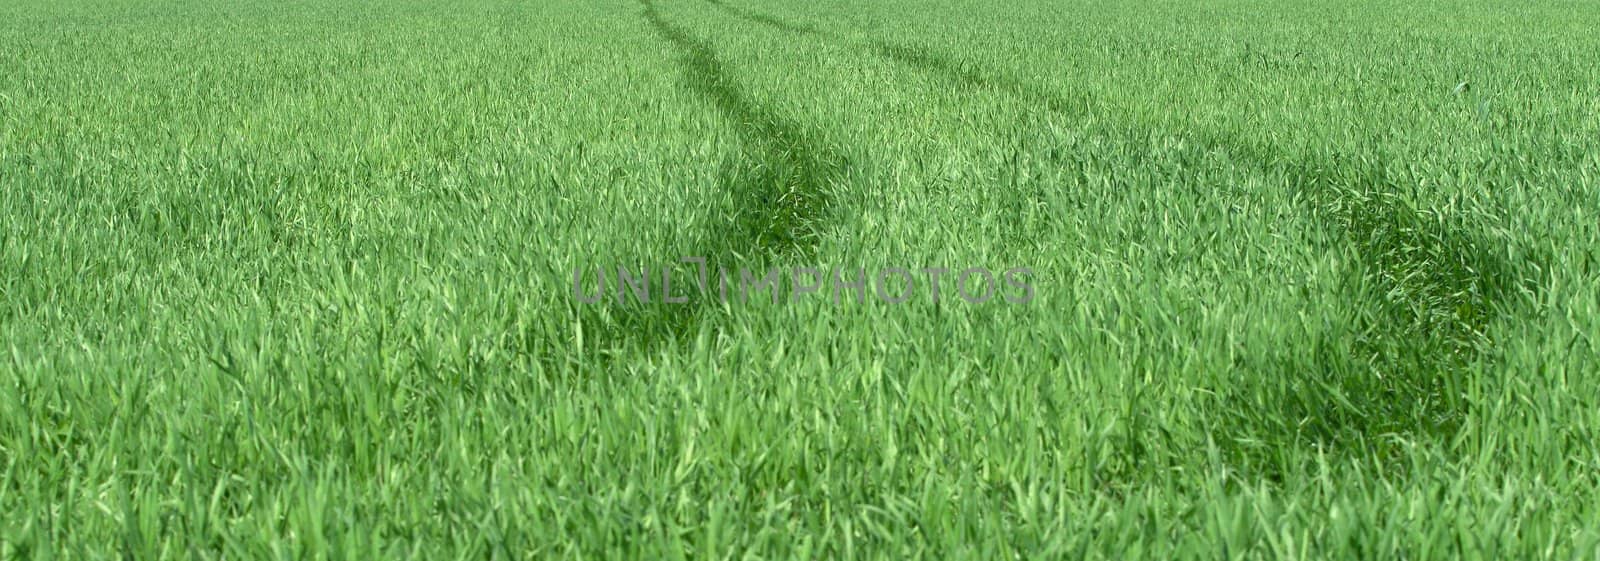 road in grass by zeber